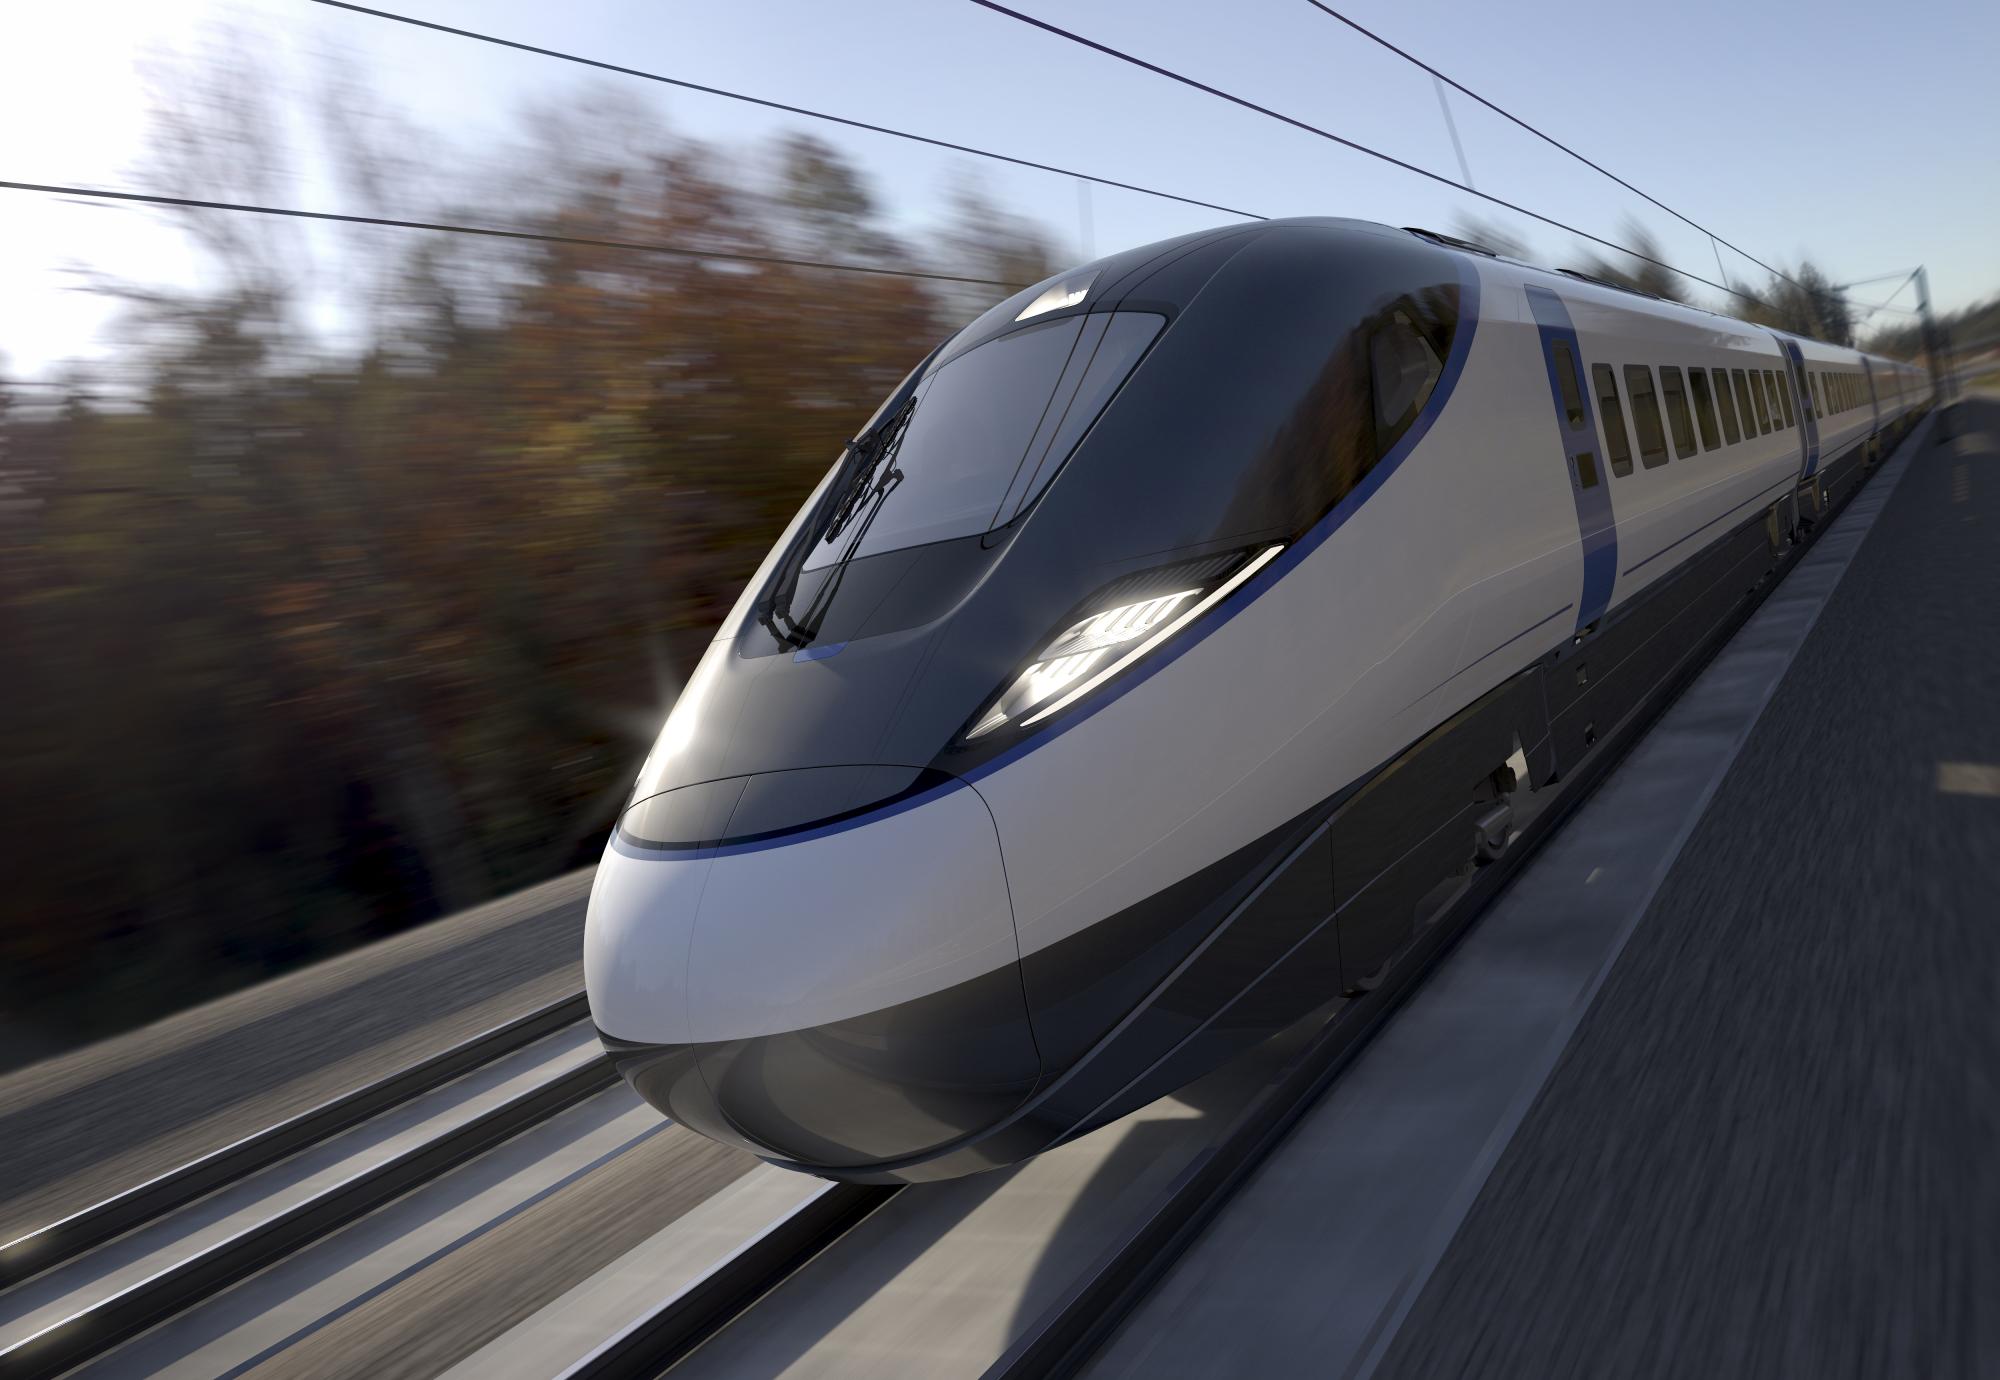 Hurdle cleared for HS2’s Phase 2b Parliament bill